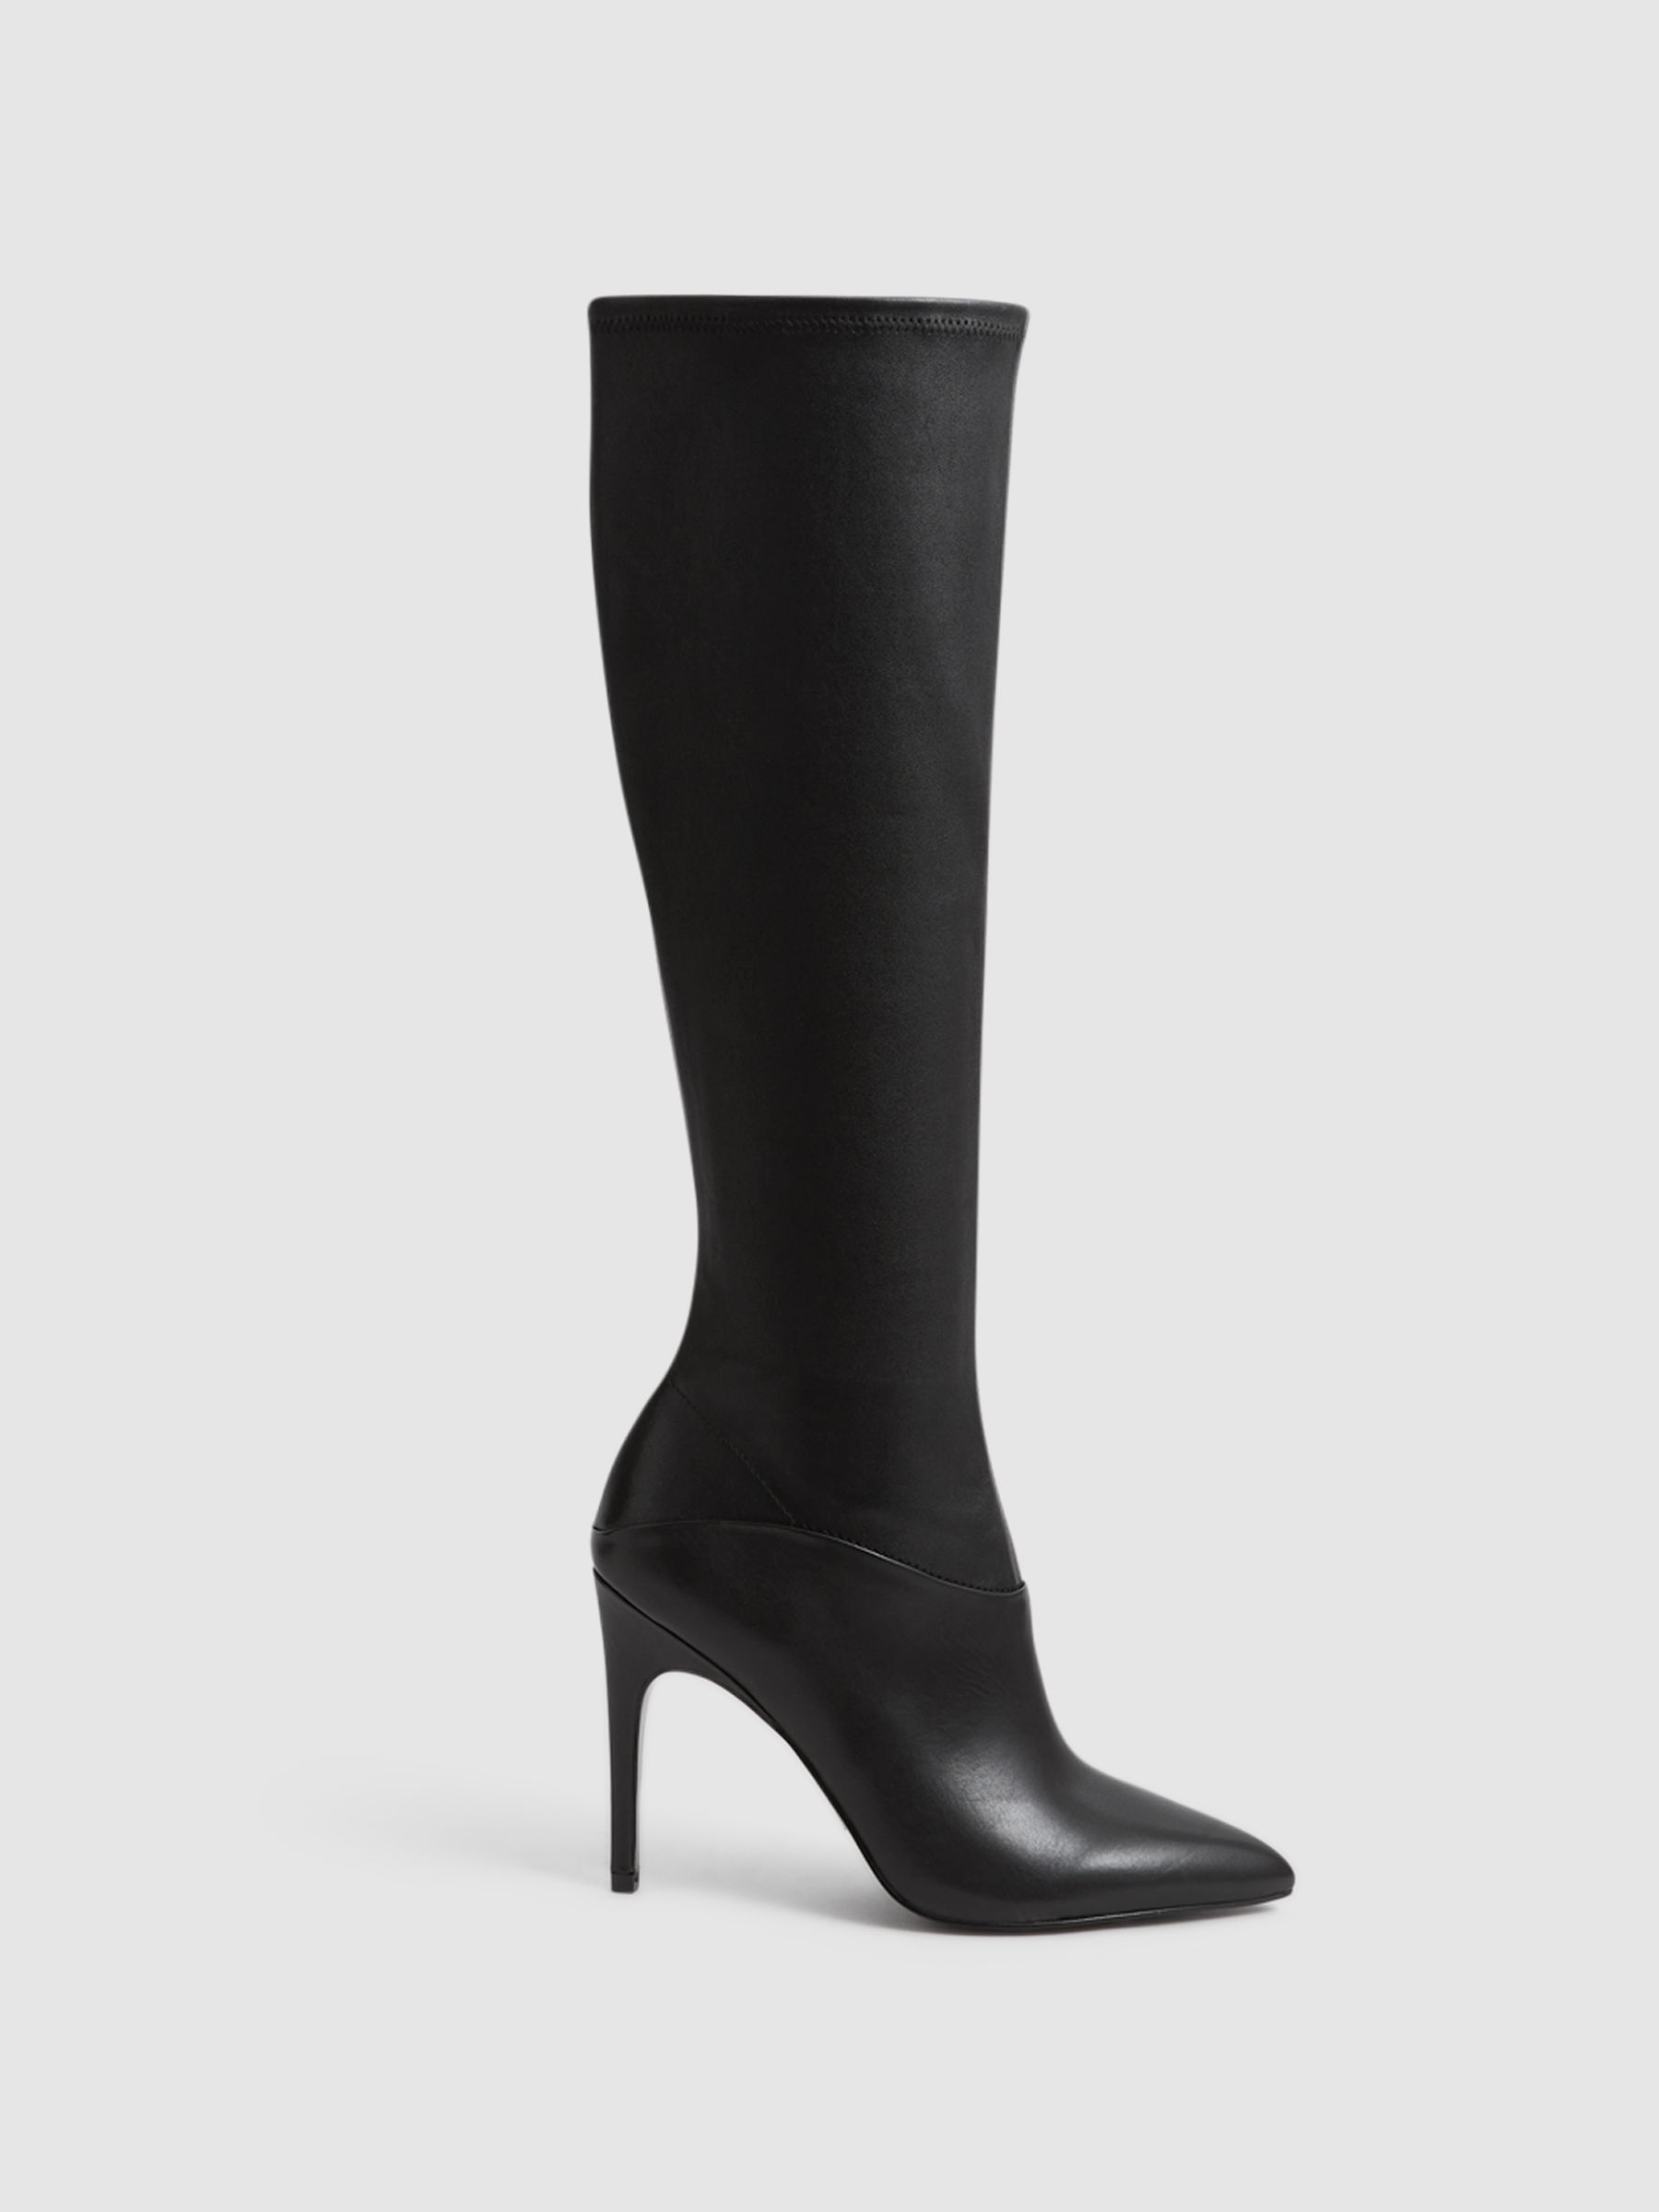 Reiss Carina Knee High Leather Boots - REISS